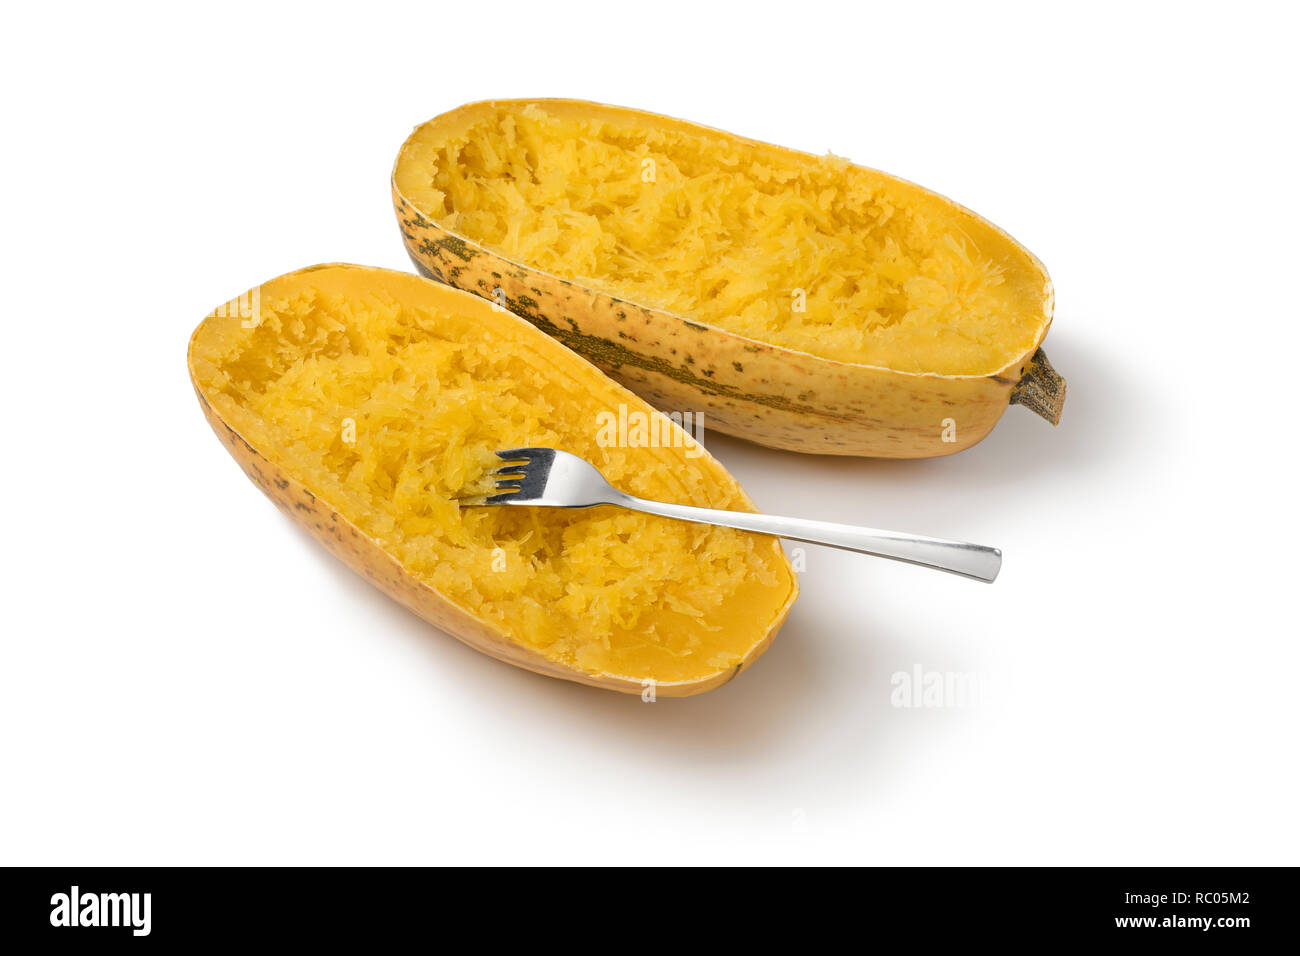 Two halved cooked spaghetti squashes isolated on white background Stock Photo